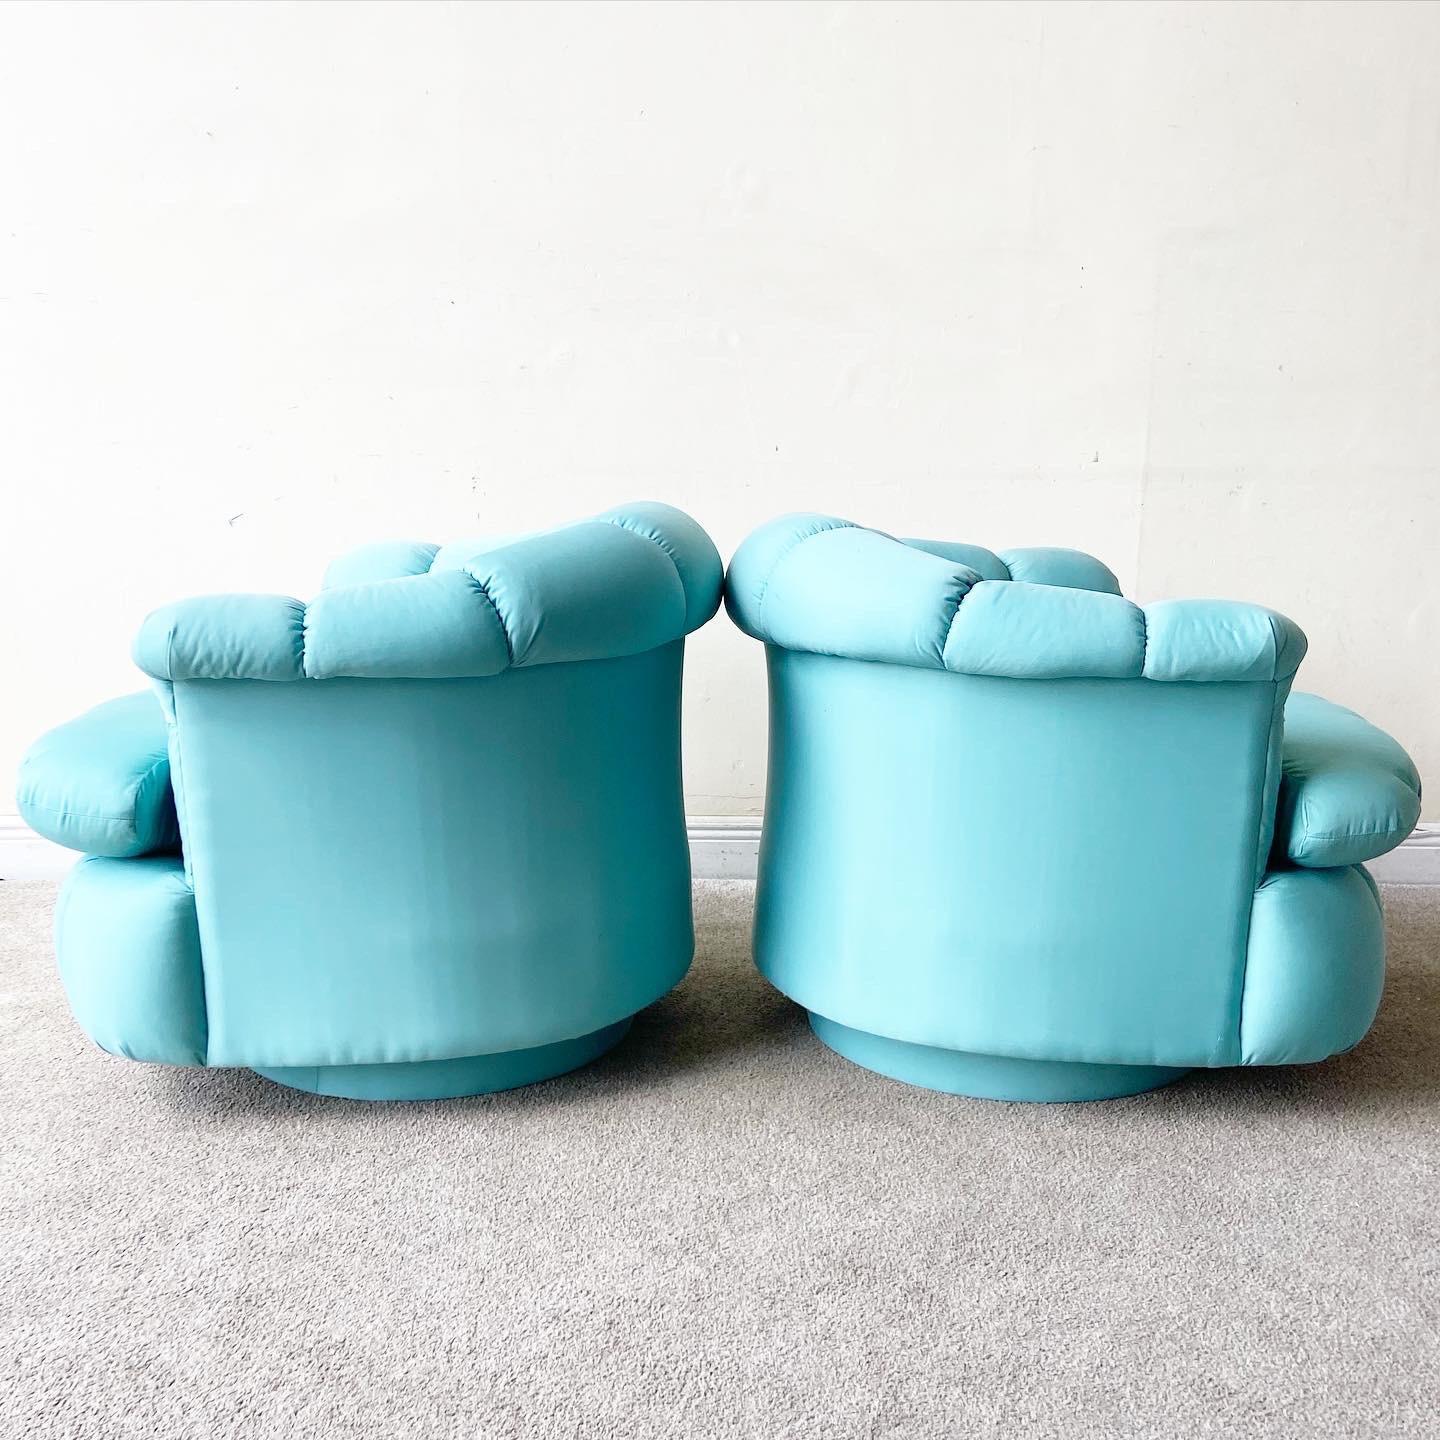 Late 20th Century Postmodern Turquoise Clam Shell Swivel Chairs, a Pair